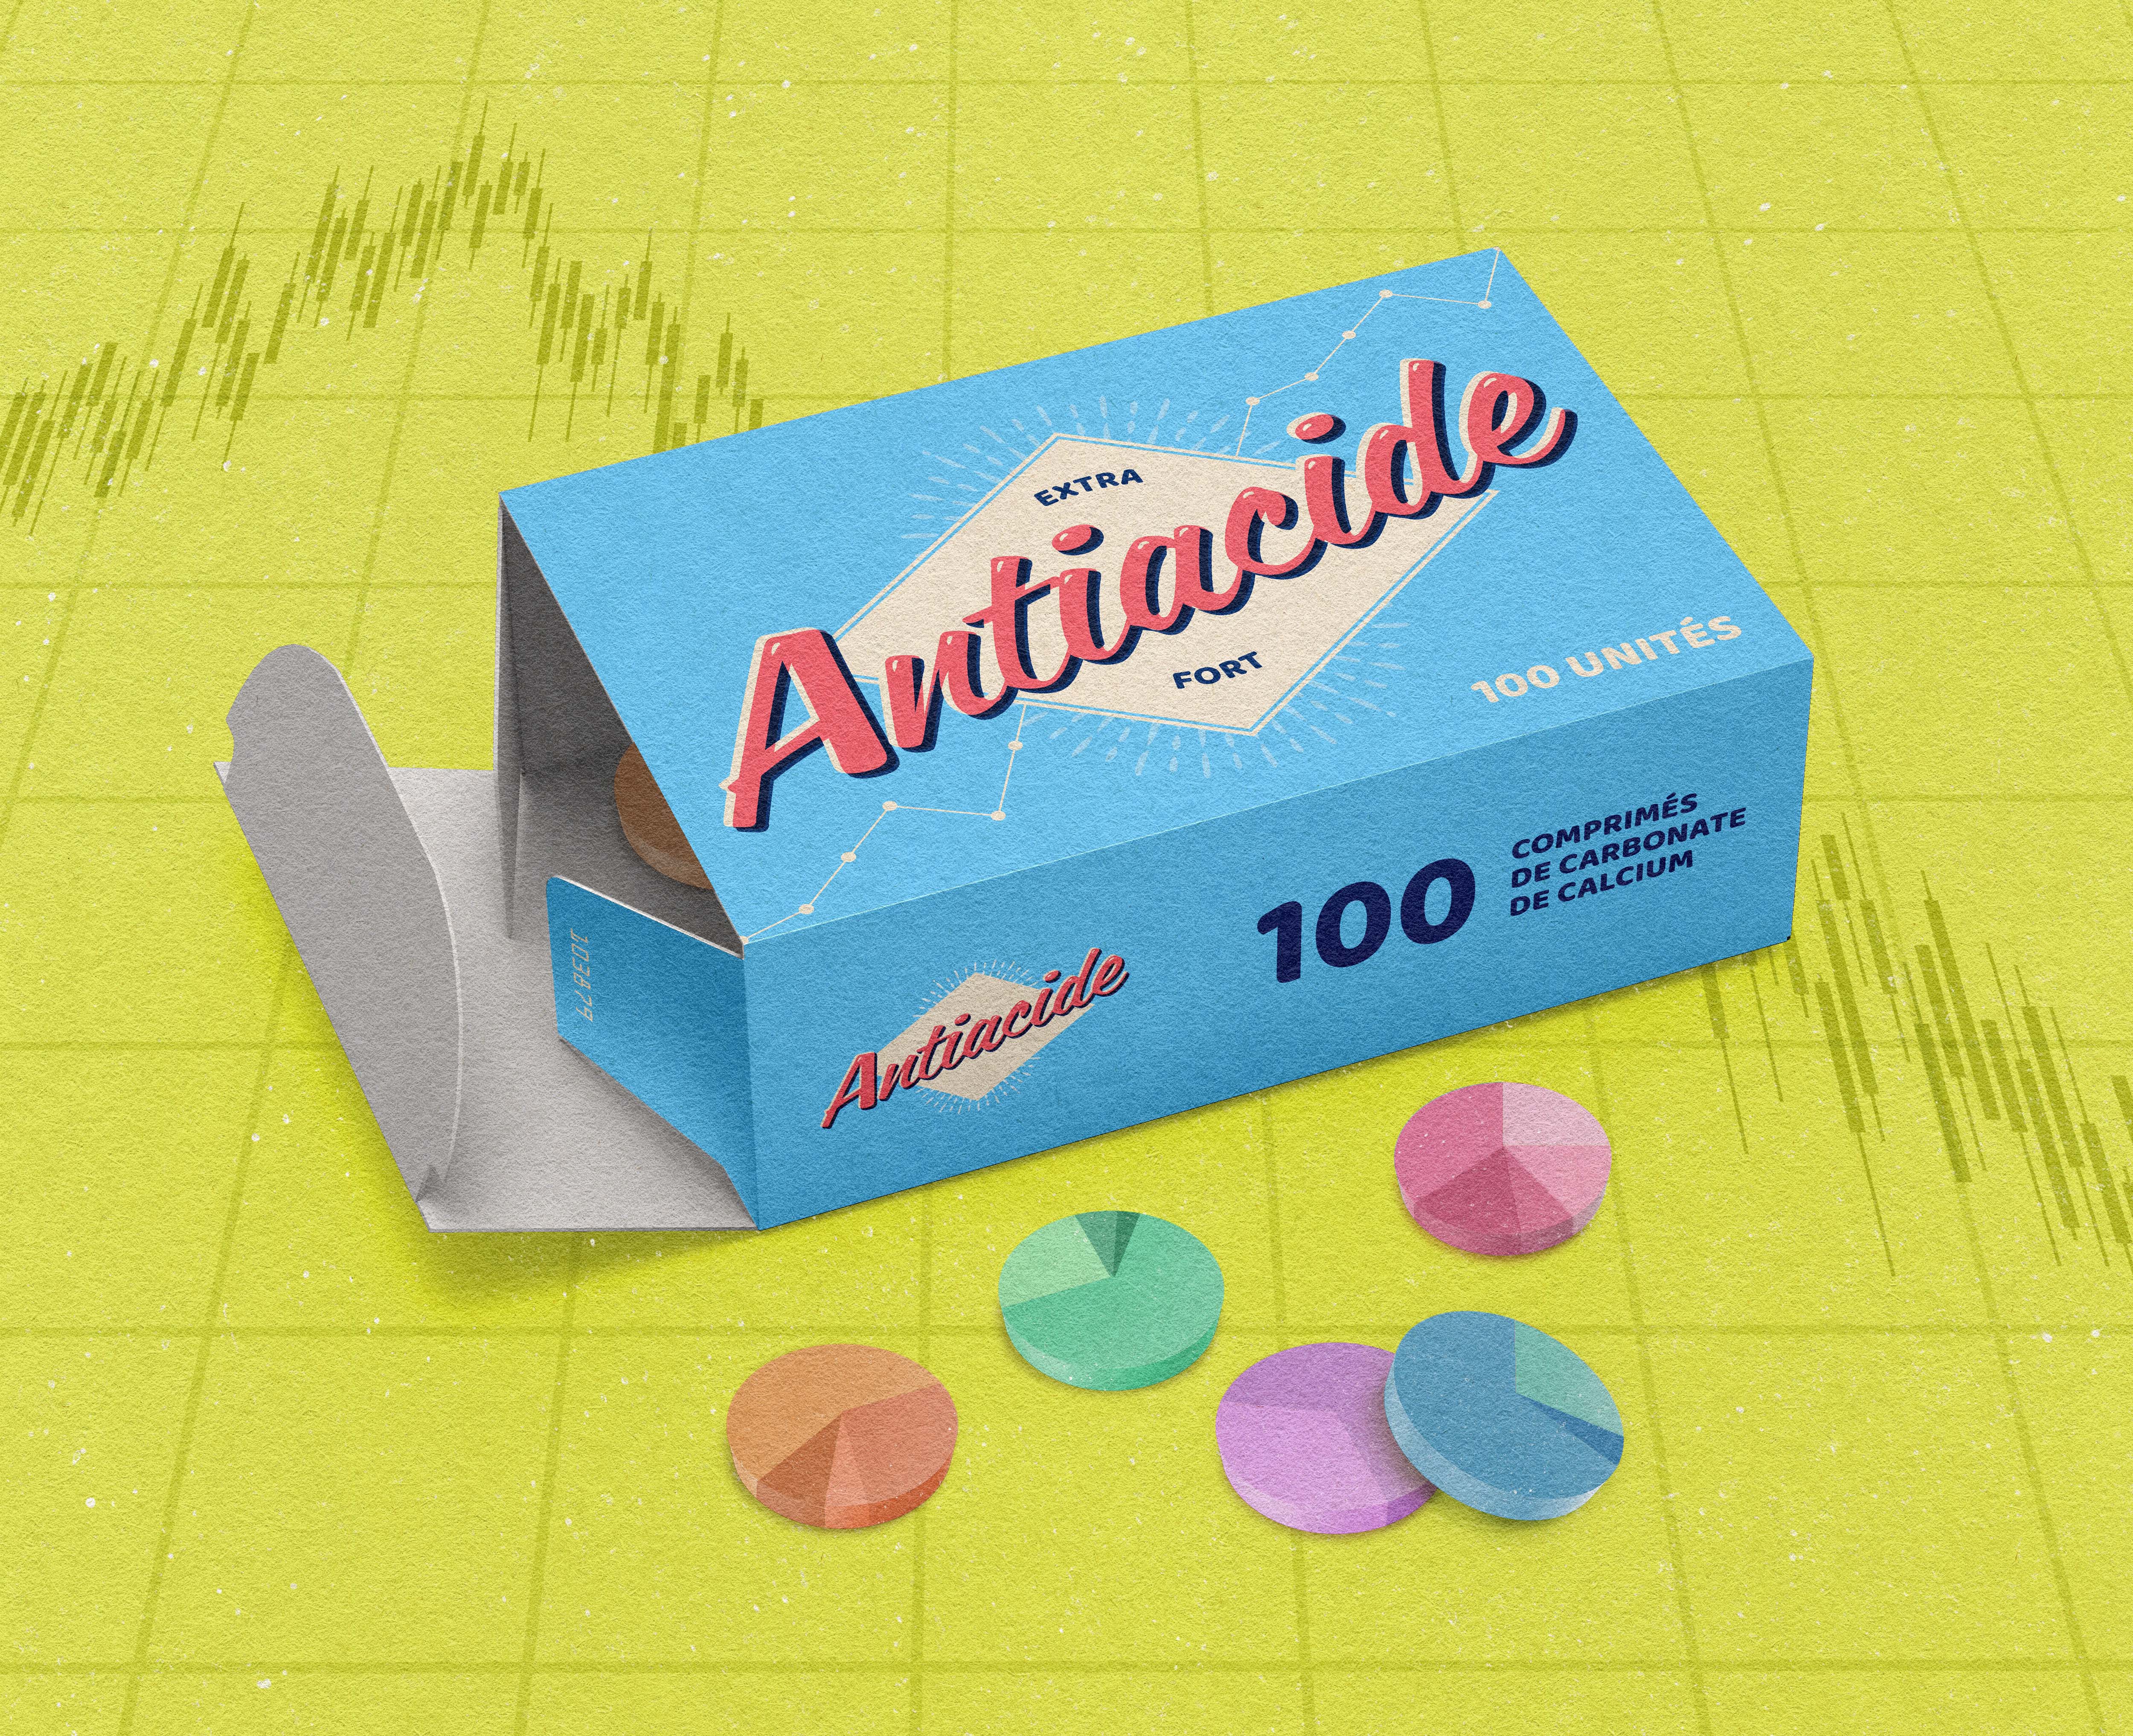 Illustration of a box of antacids, surrounded by pills that look like pie charts, on a stock market background.